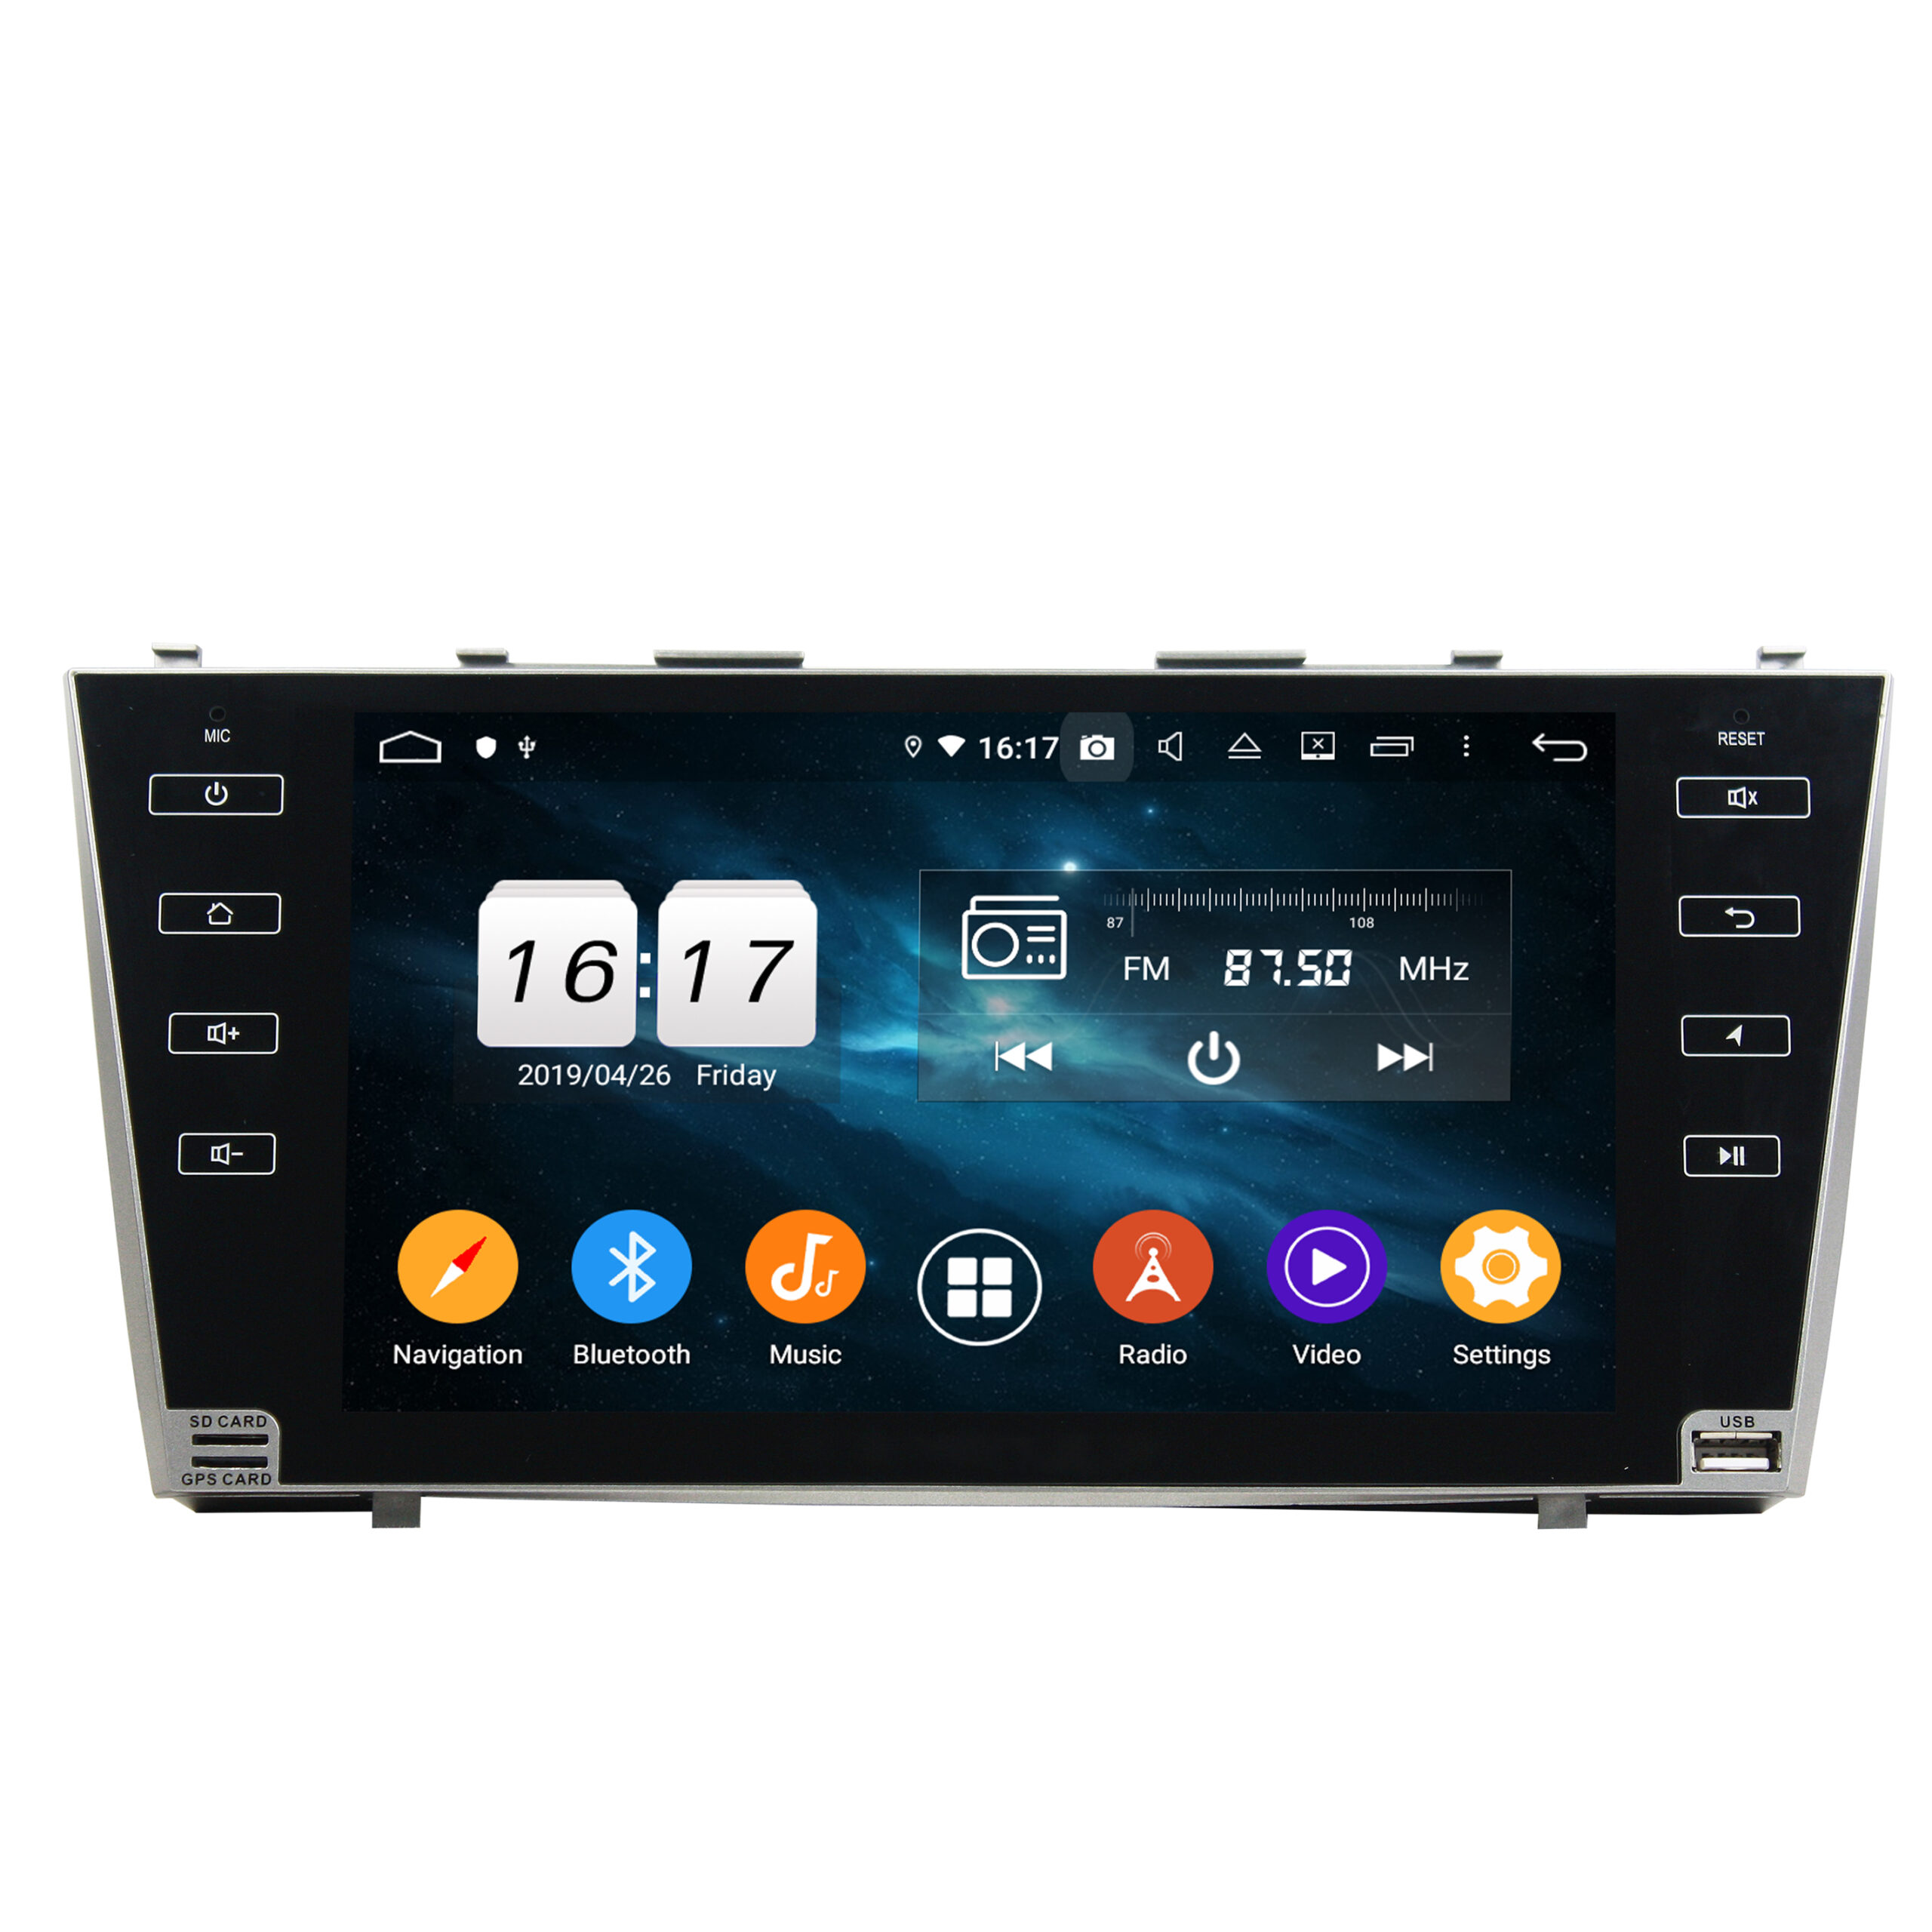 KD-9617 car navigation player stereo receiver for Camry 2007-2011